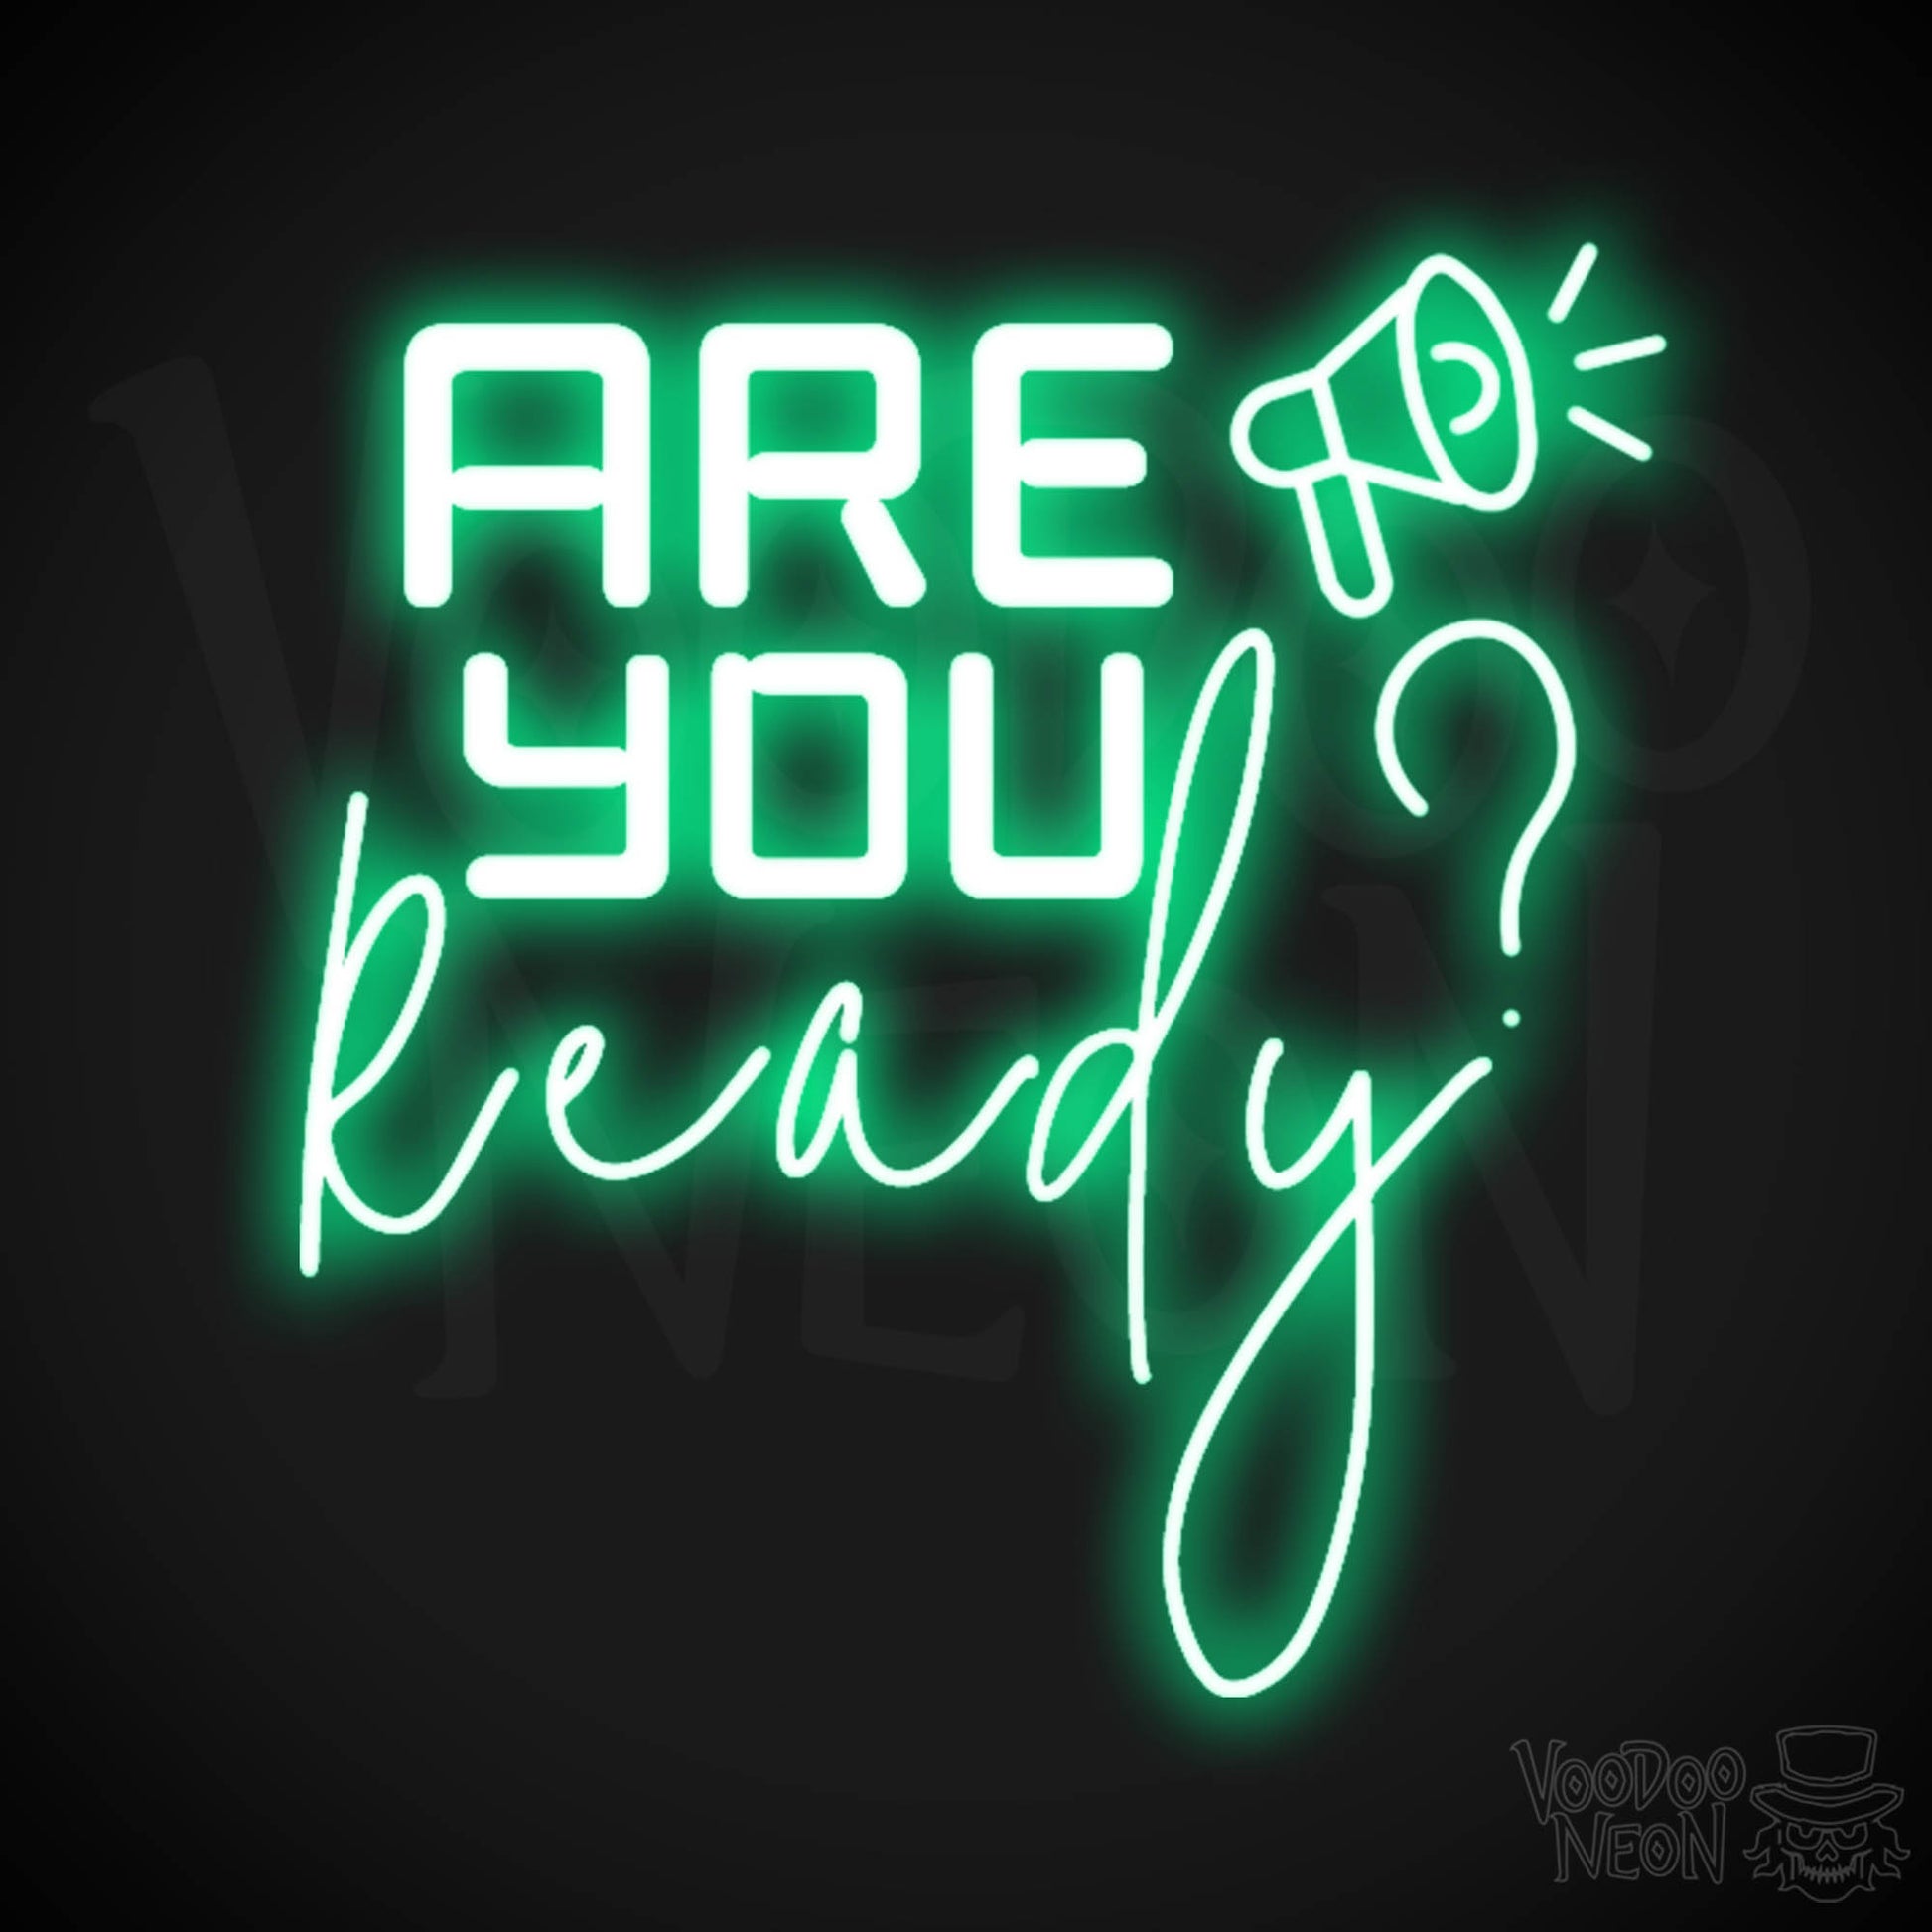 Are You Ready Neon Sign - Neon Are You Ready Sign - LED Wall Art - Color Green